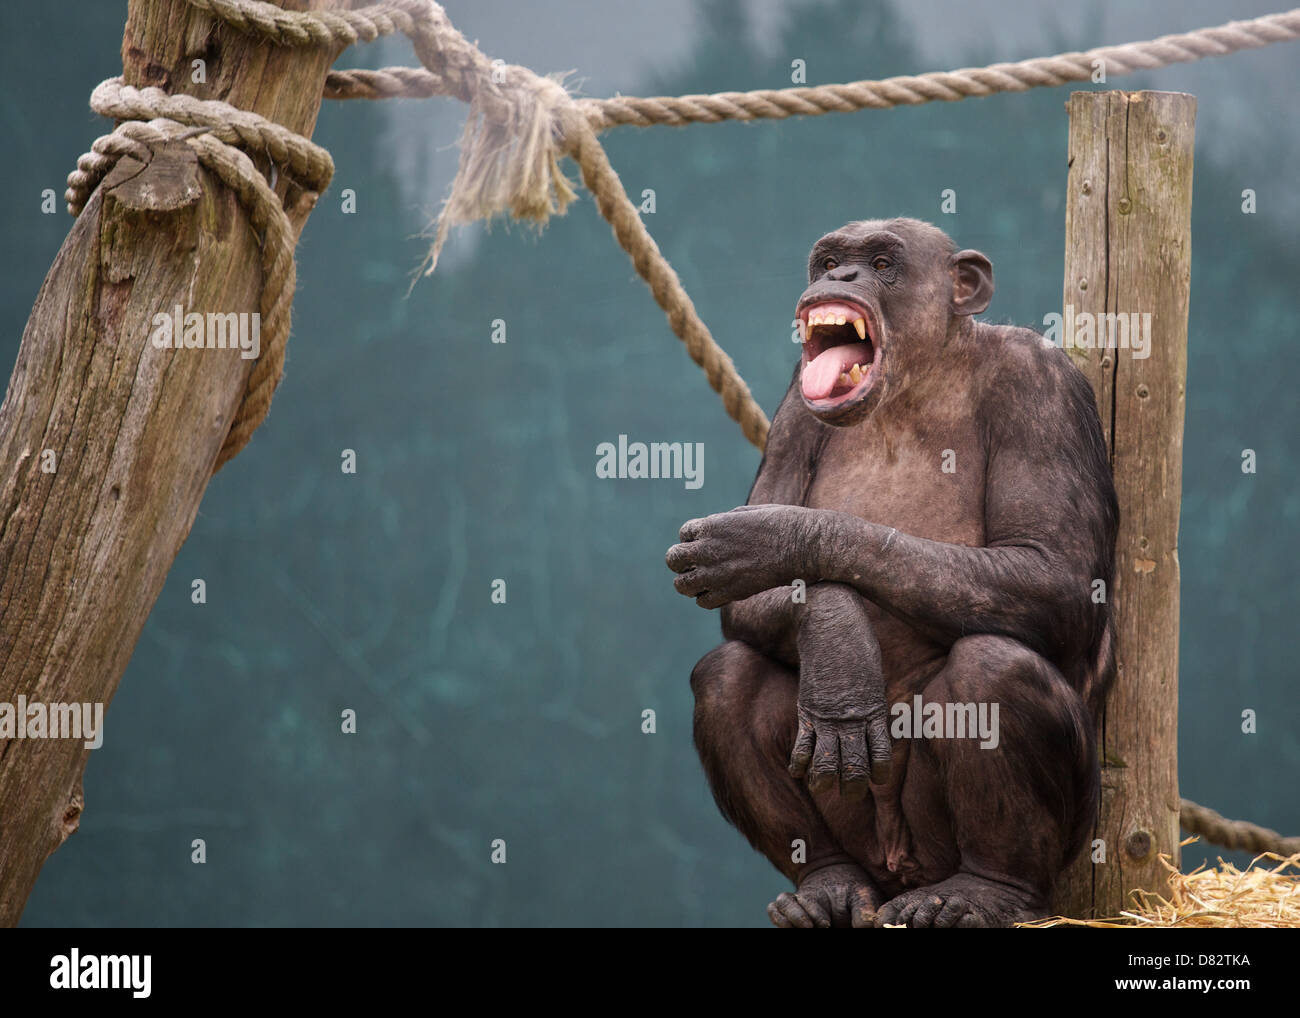 A chimp pulls a face at another chimp out of shot Stock Photo